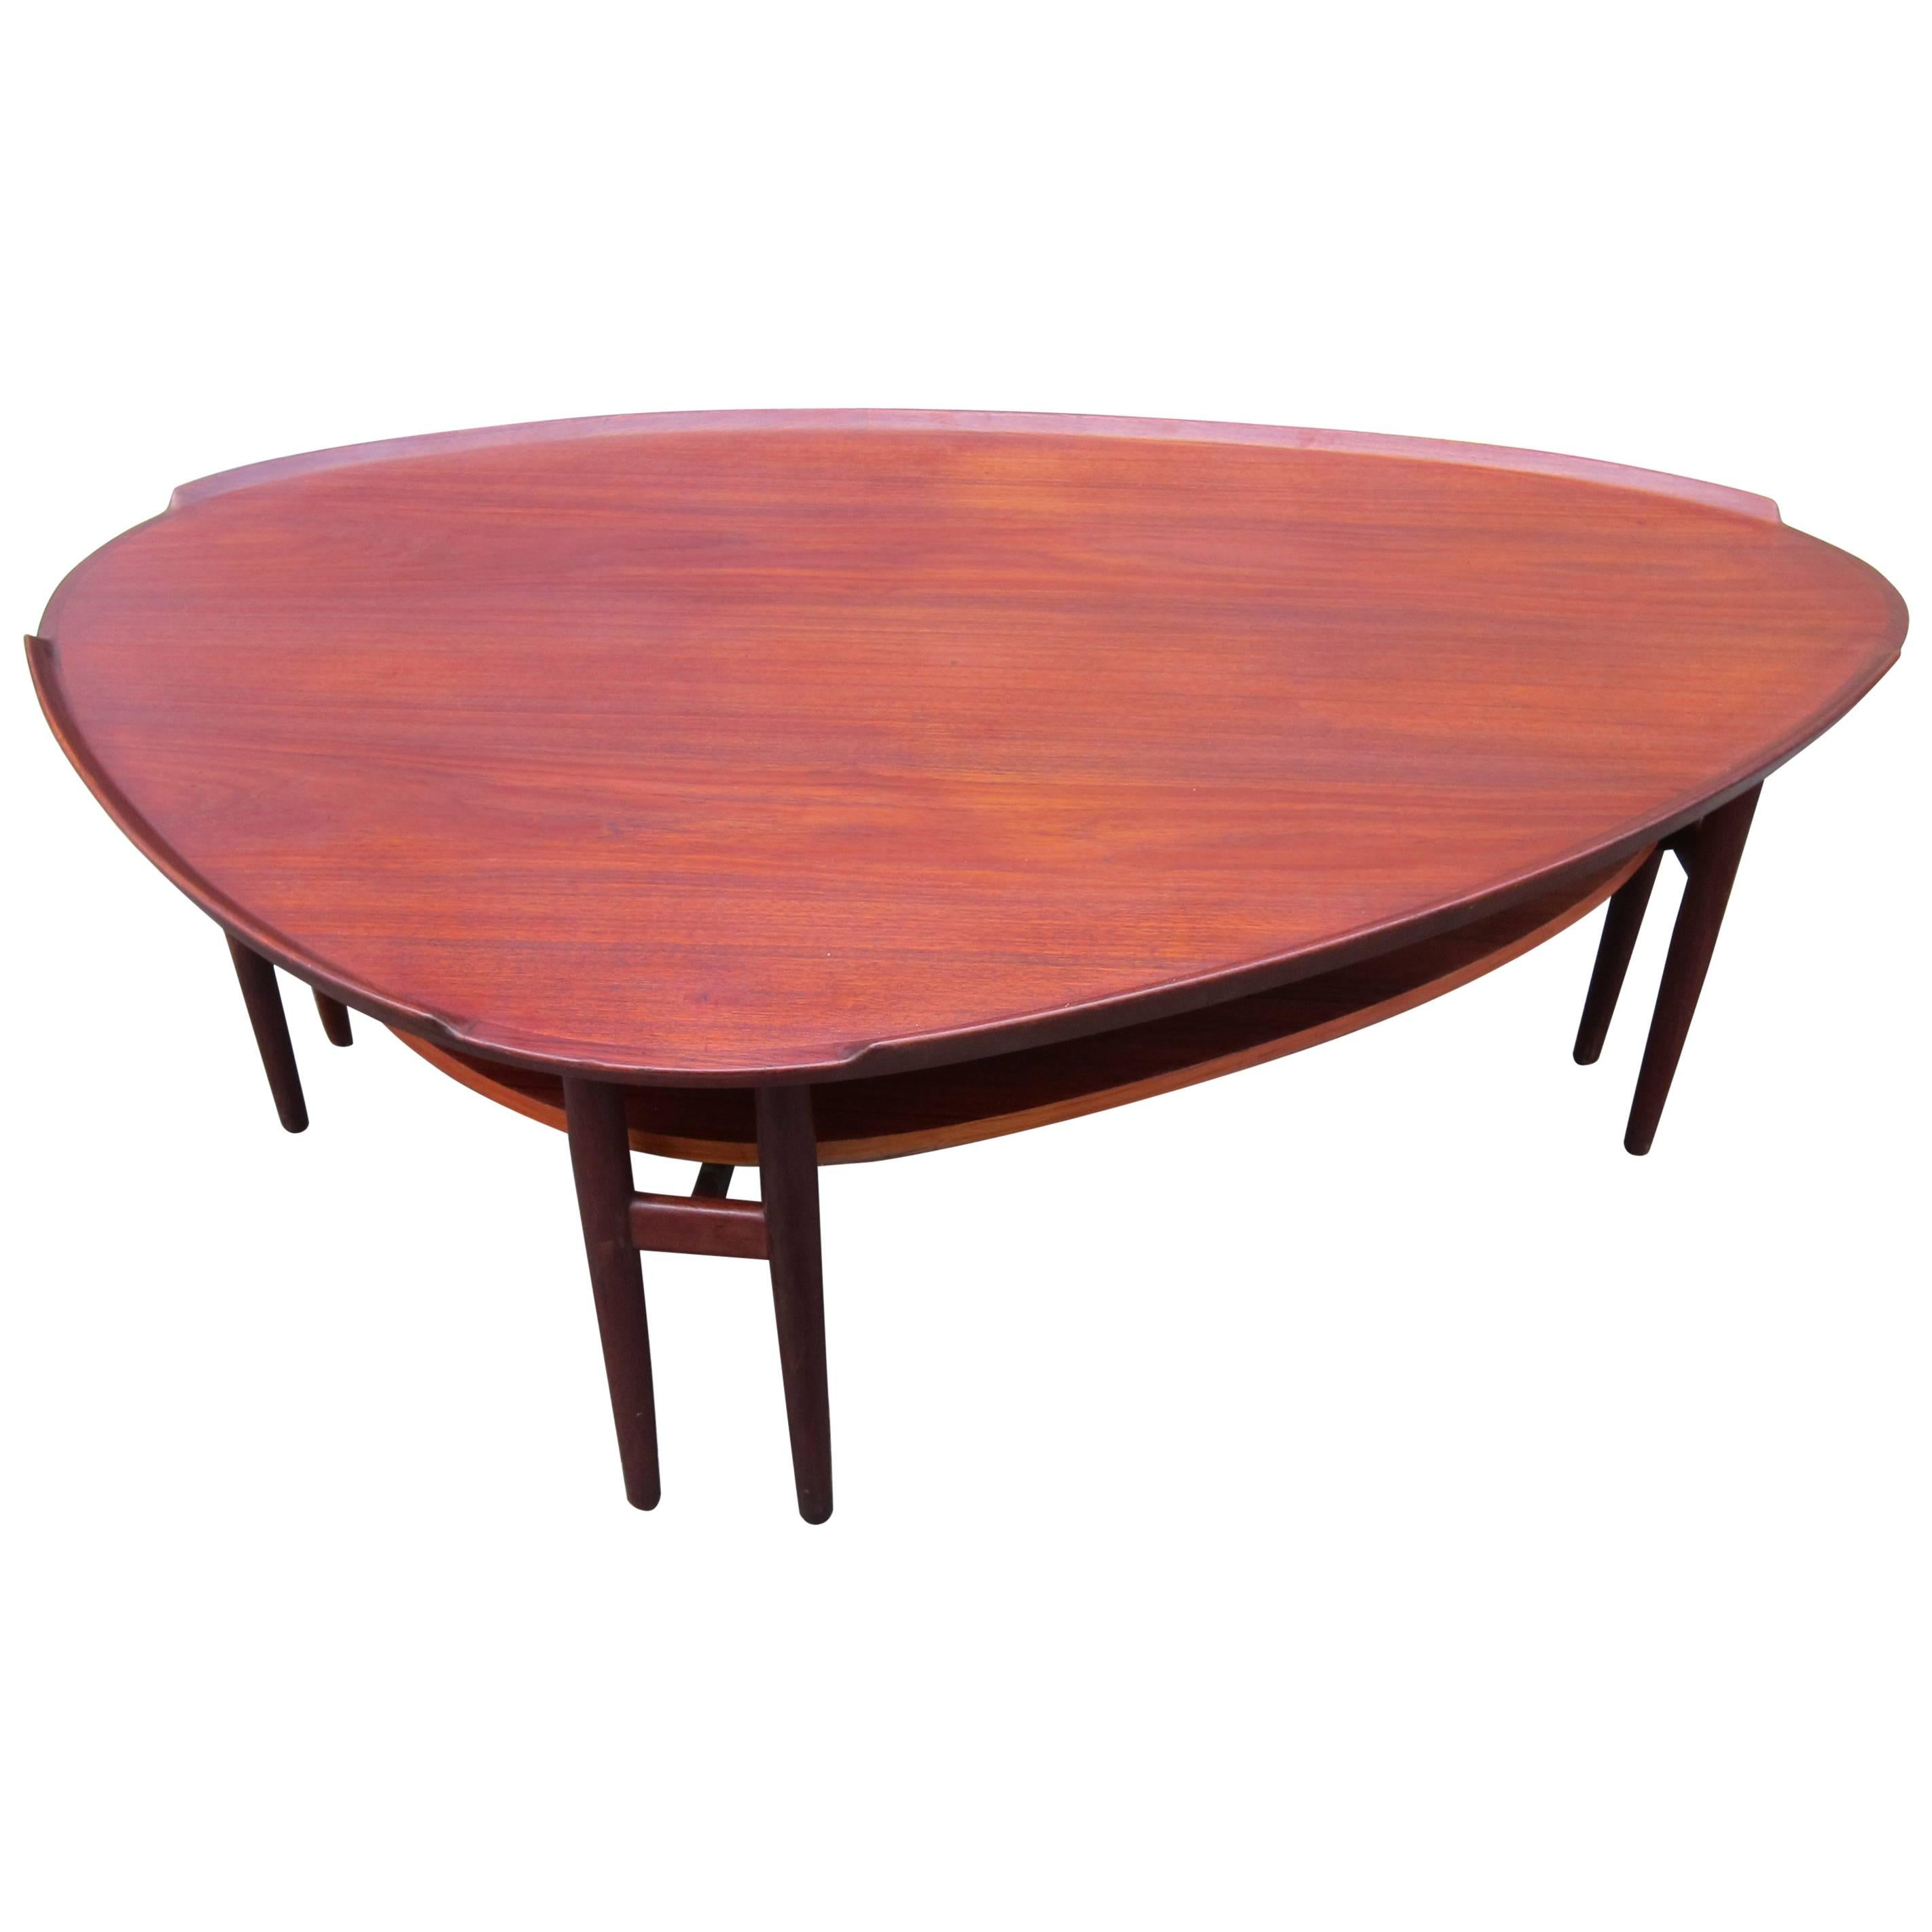 This outstanding kidney shaped table is designed by Arne Vodder in 1963 for Sibast Møbler in Denmark. The table comes with a teak shelf and a partly raised edge.

It is out of production and you rarely see it today.

It is professionally